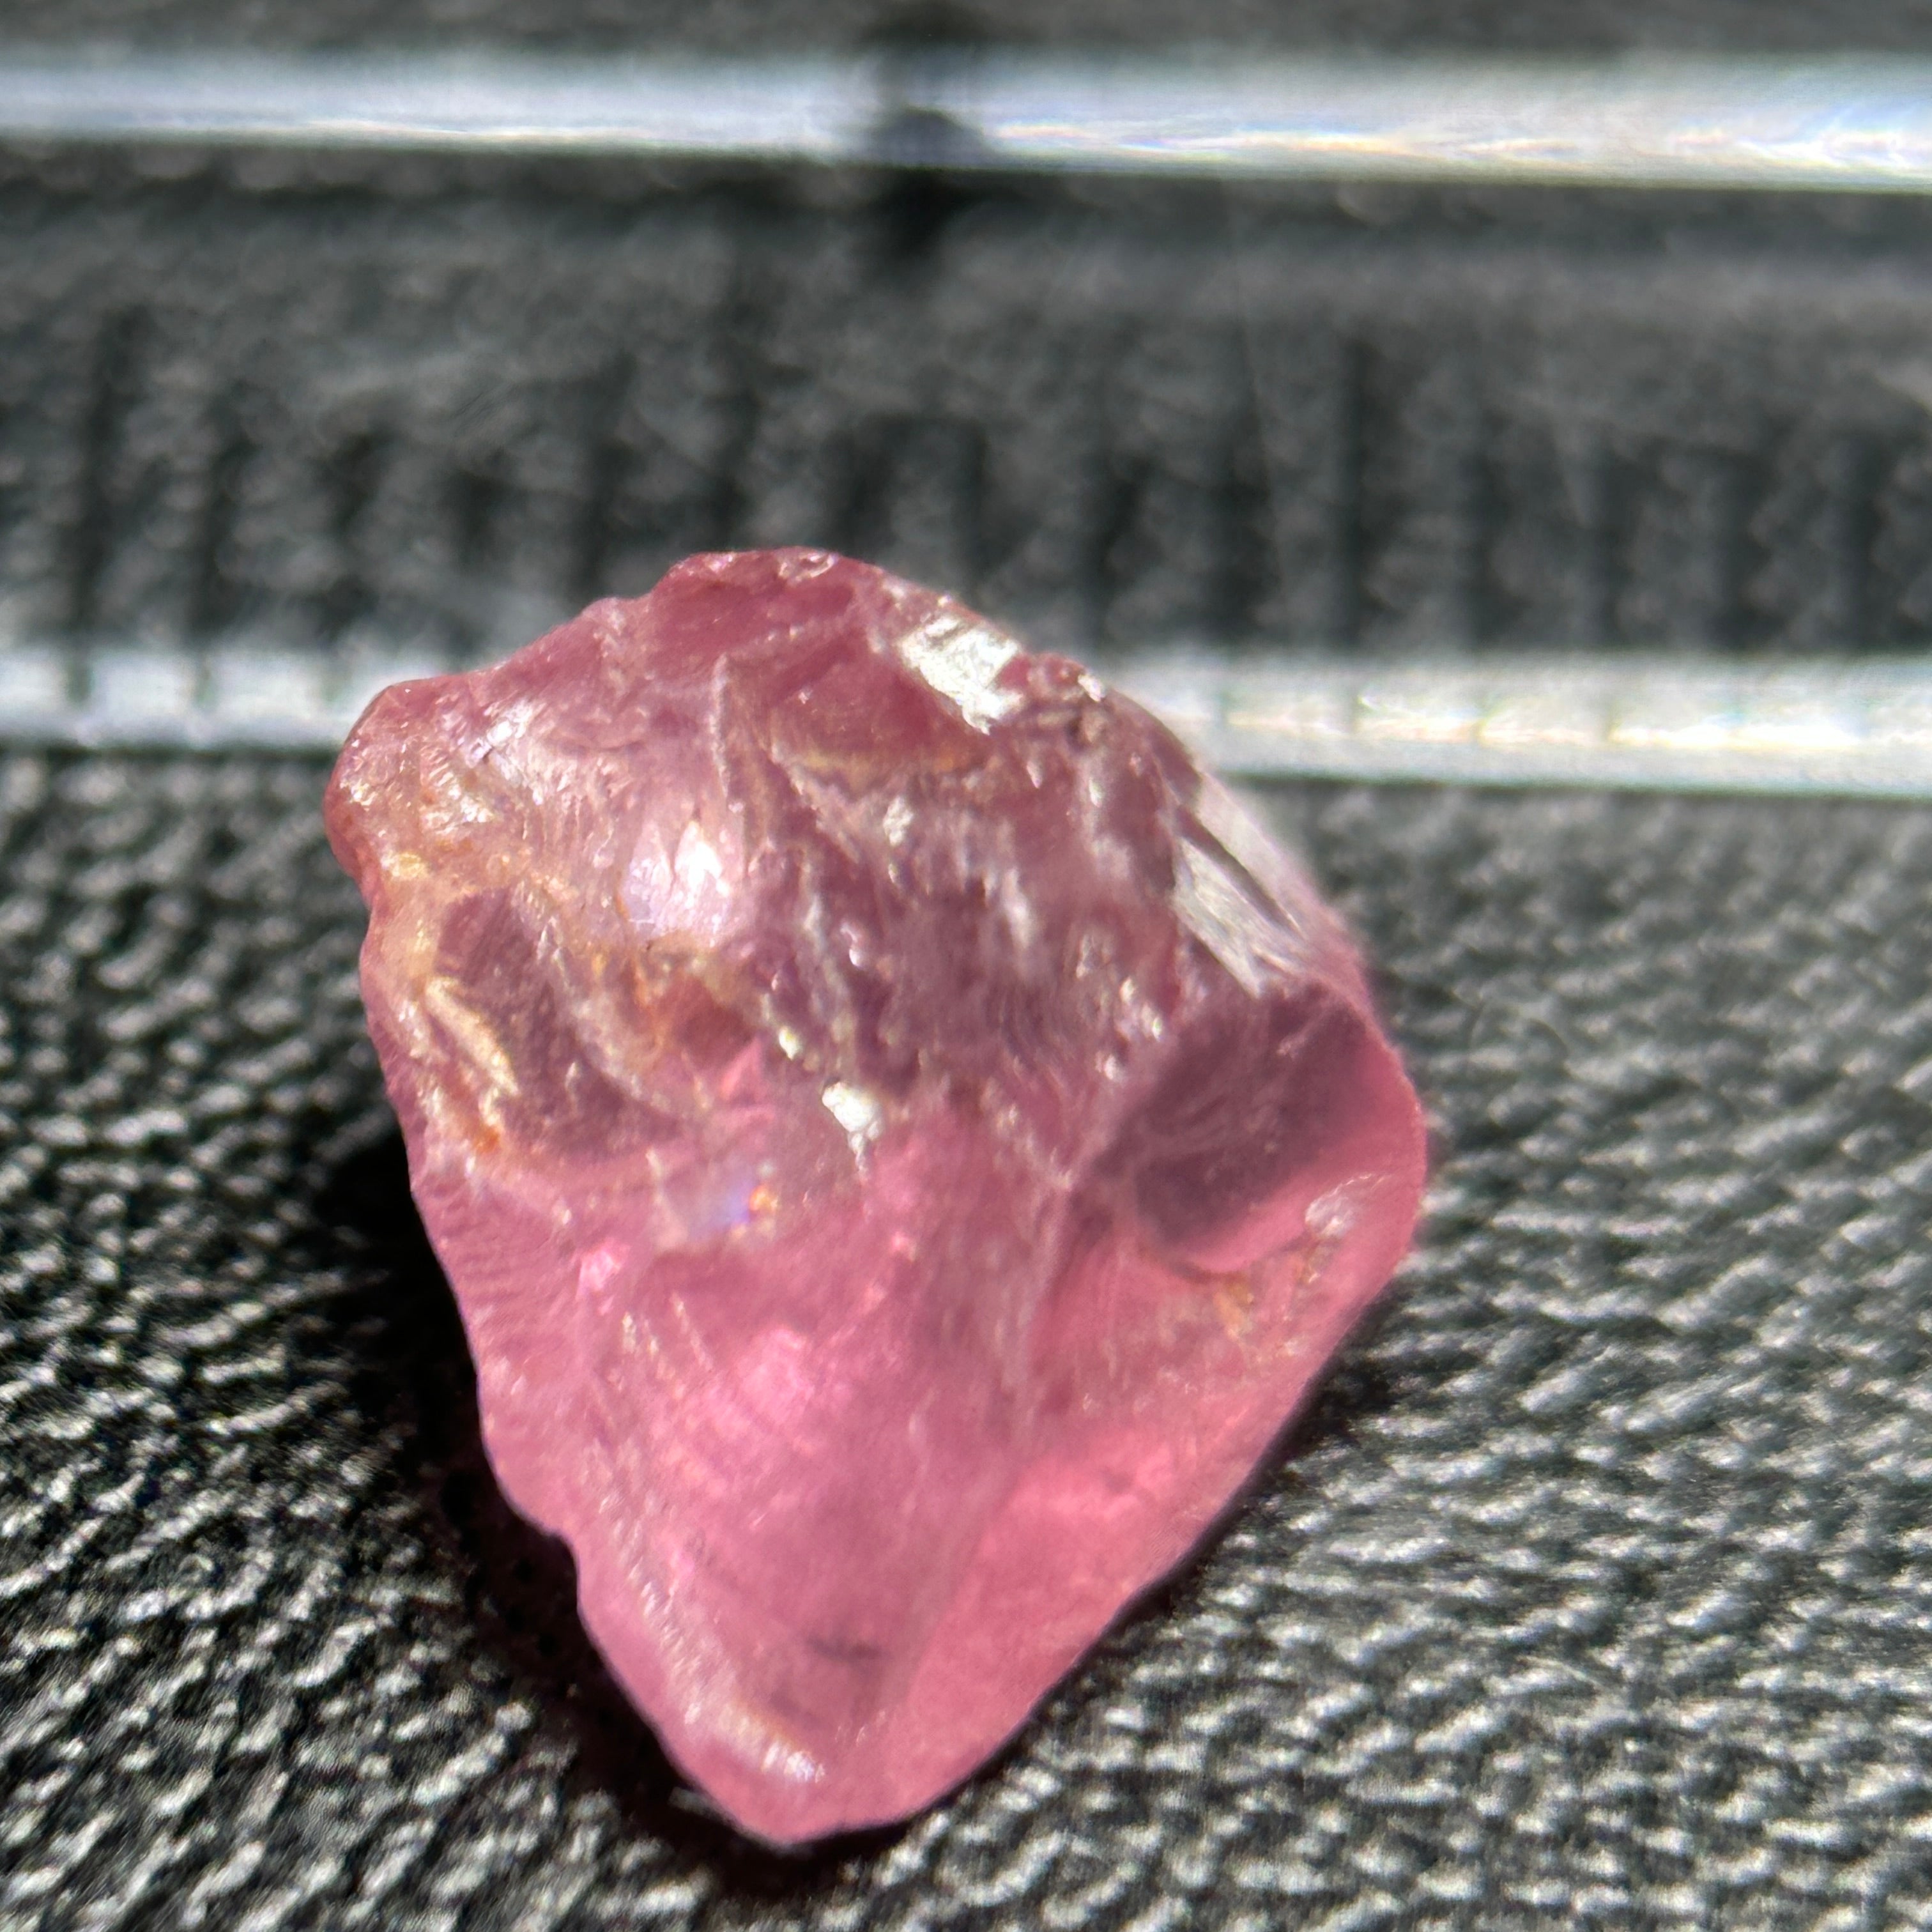 3.14ct Spinel, Tanzania, Untreated Unheated, slight inclusion on the side coming 1/3rd in